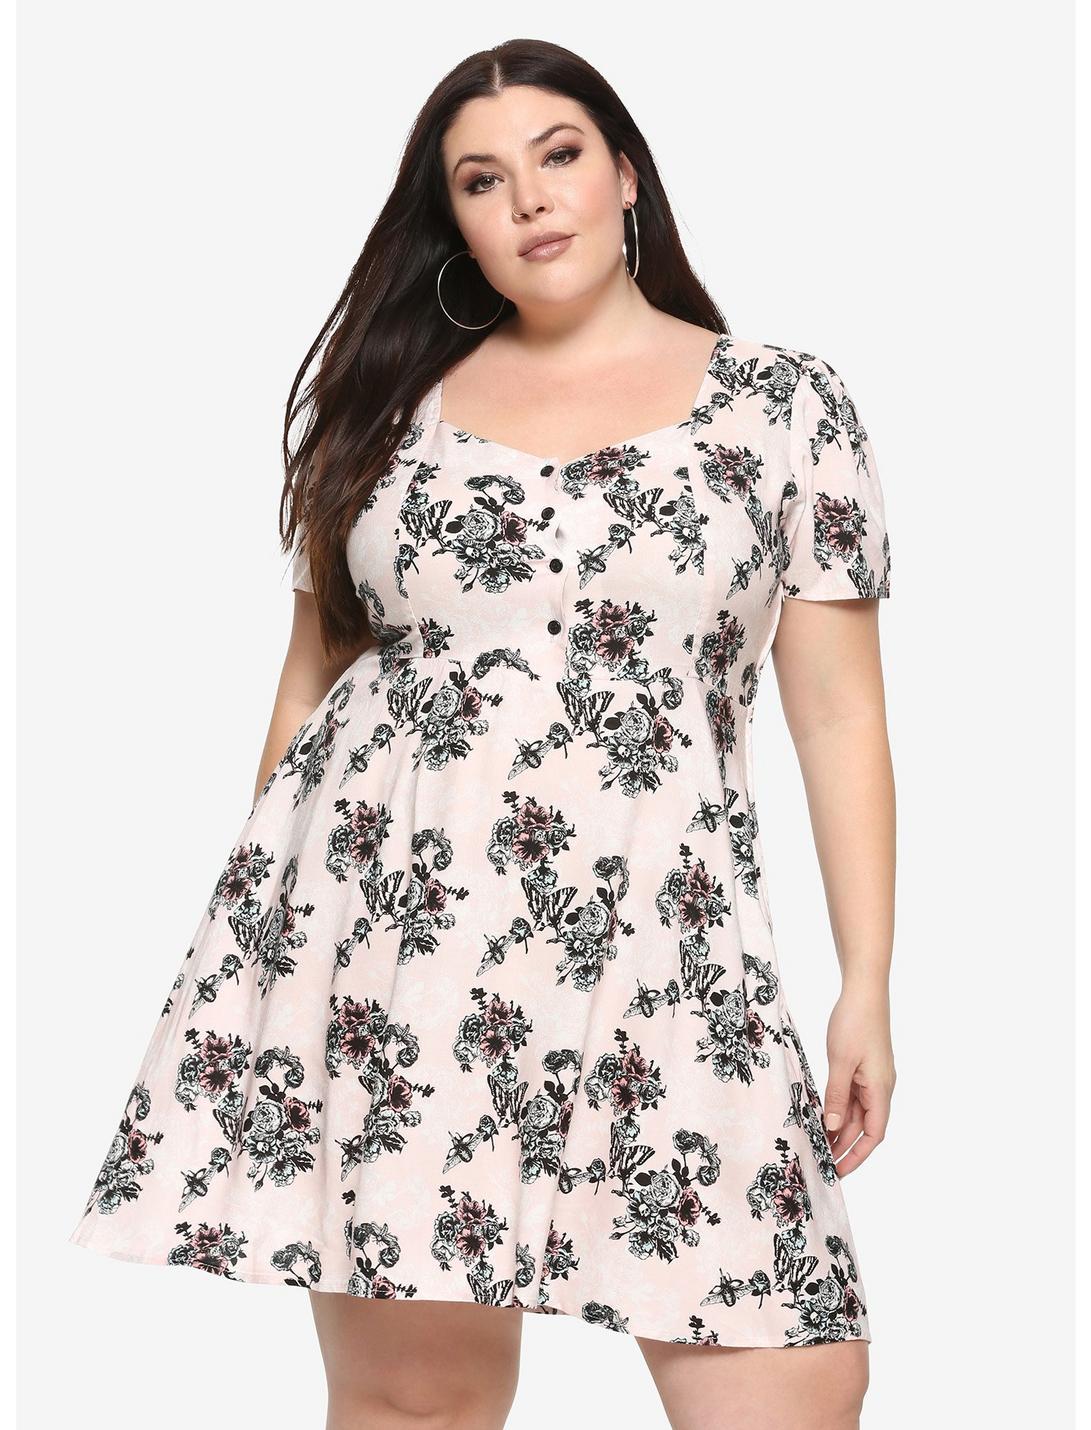 Pink Floral & Bug Retro Dress Plus Size | Hot Topic